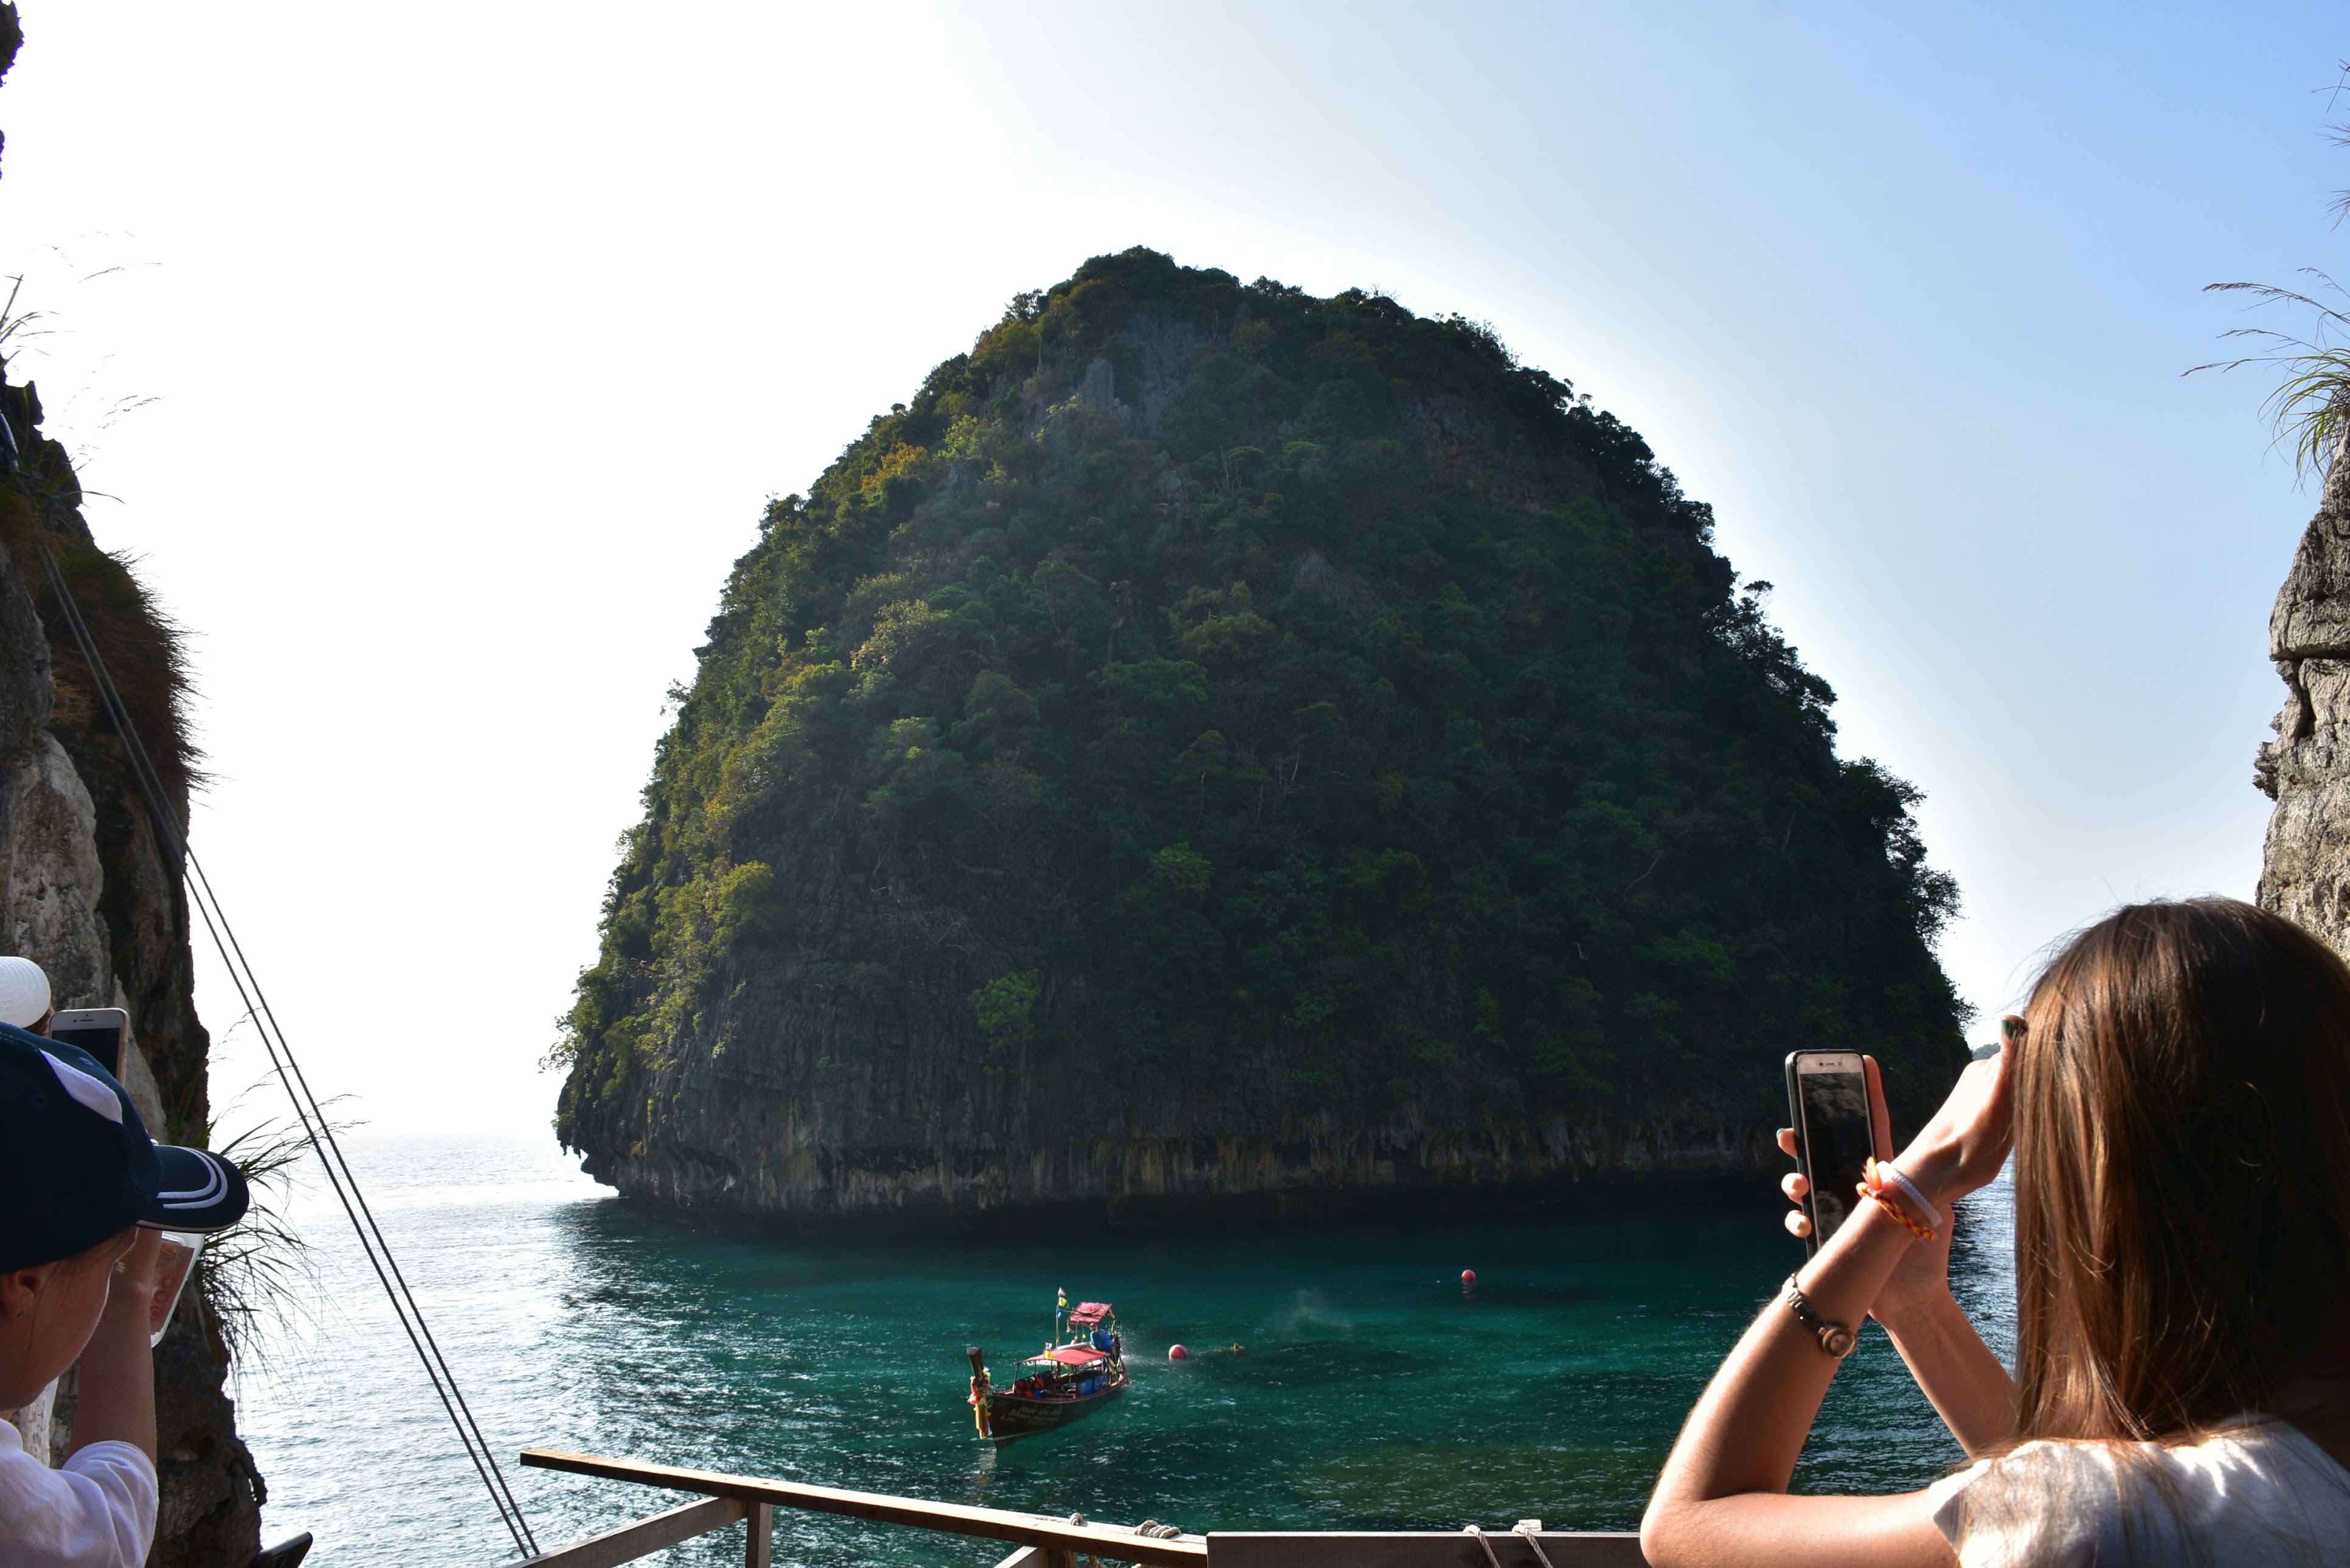 Phi Phi Islands Snorkling Tour by Speedboat from Krabi operated by Sea Eagle